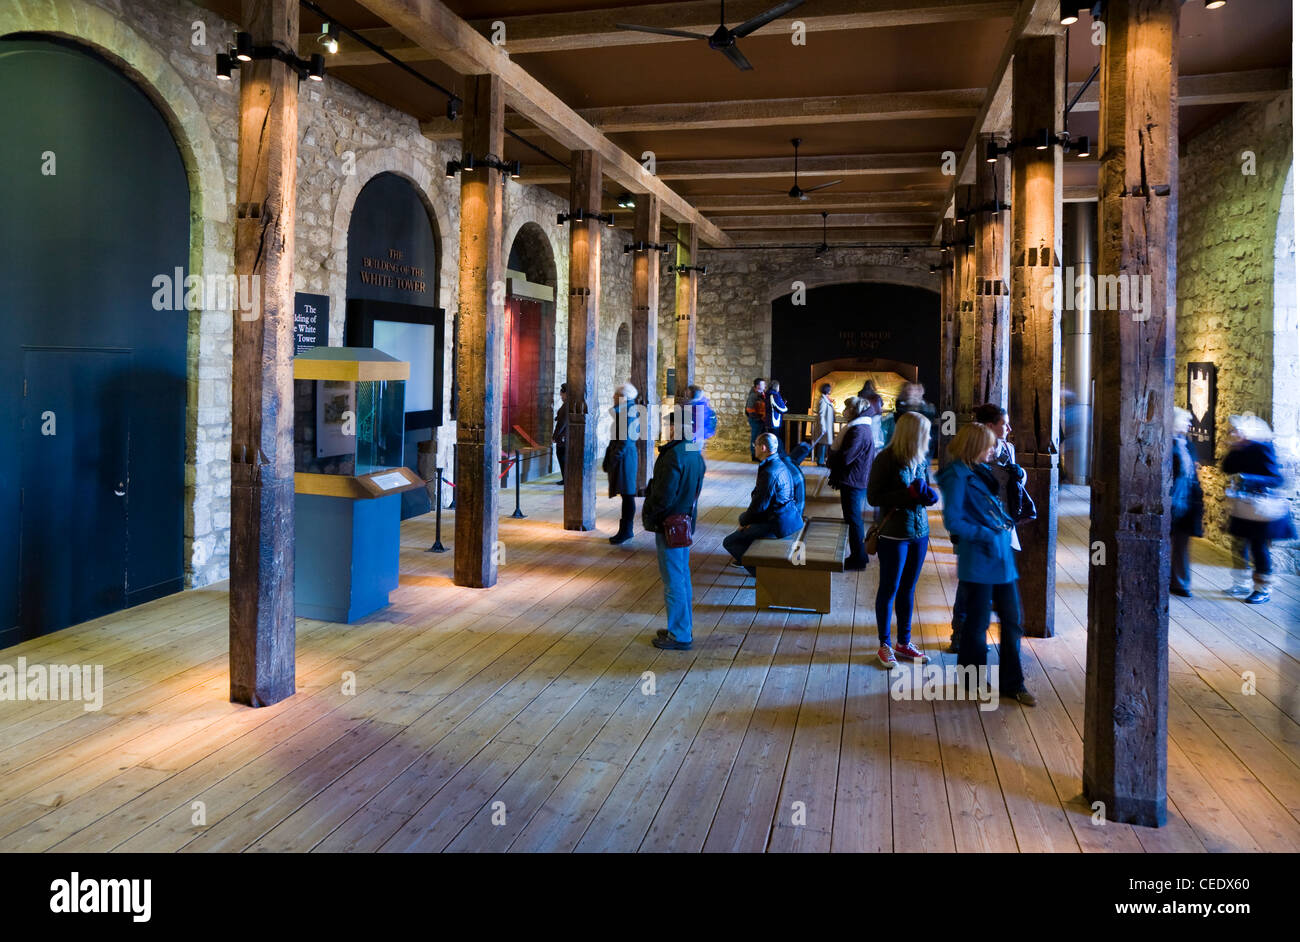 Room / chamber inside the interior of the White tower at the Tower of London.  UK Stock Photo - Alamy